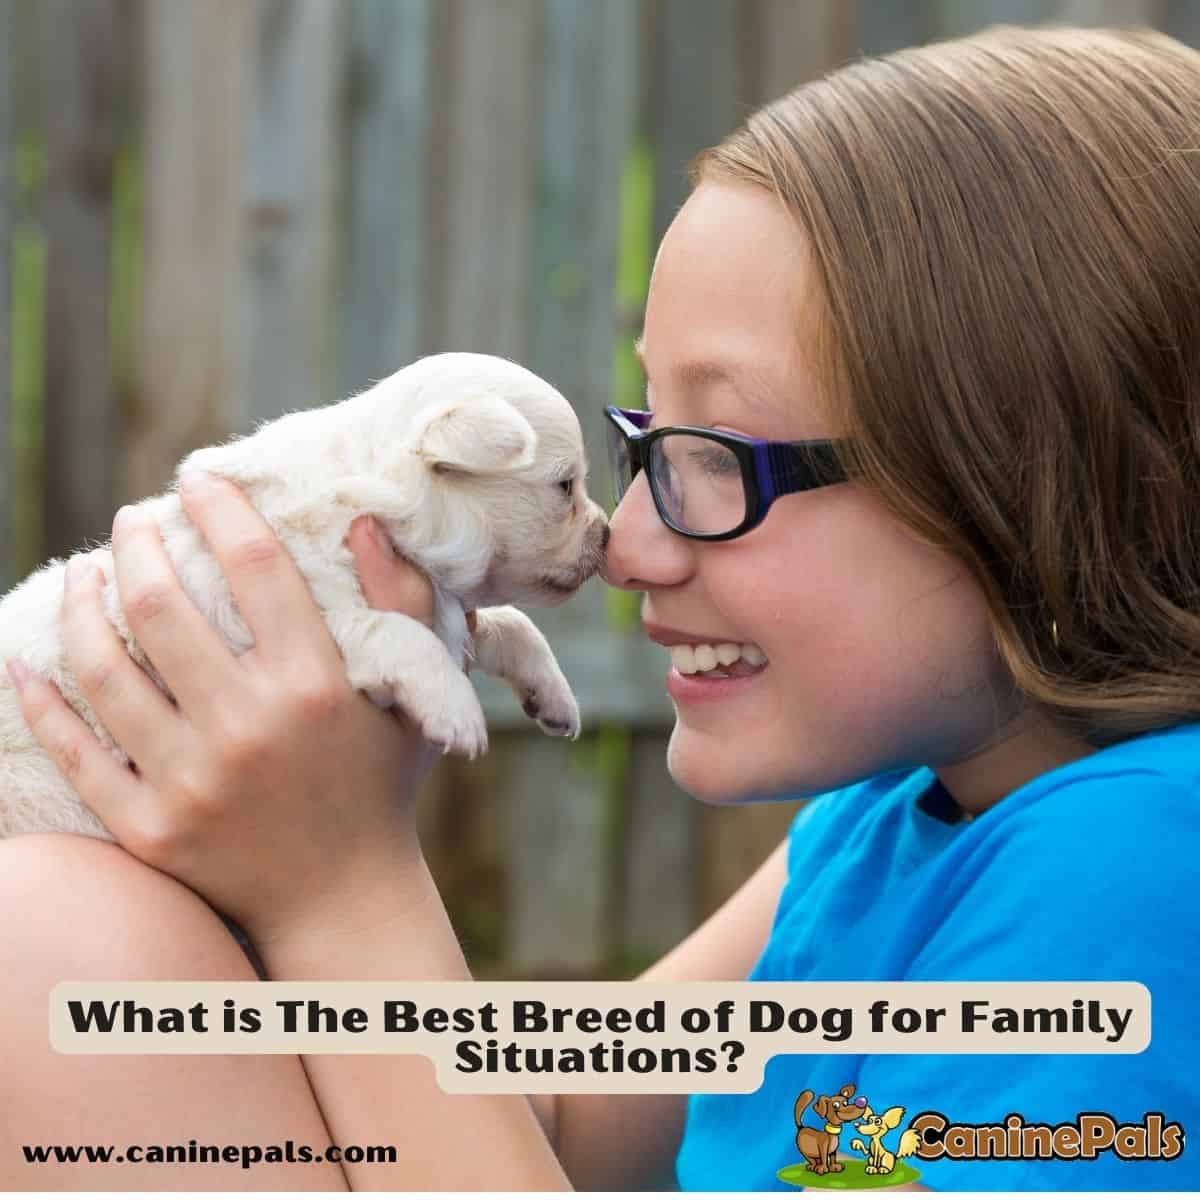 What is The Best Breed of Dog for Family Situations?